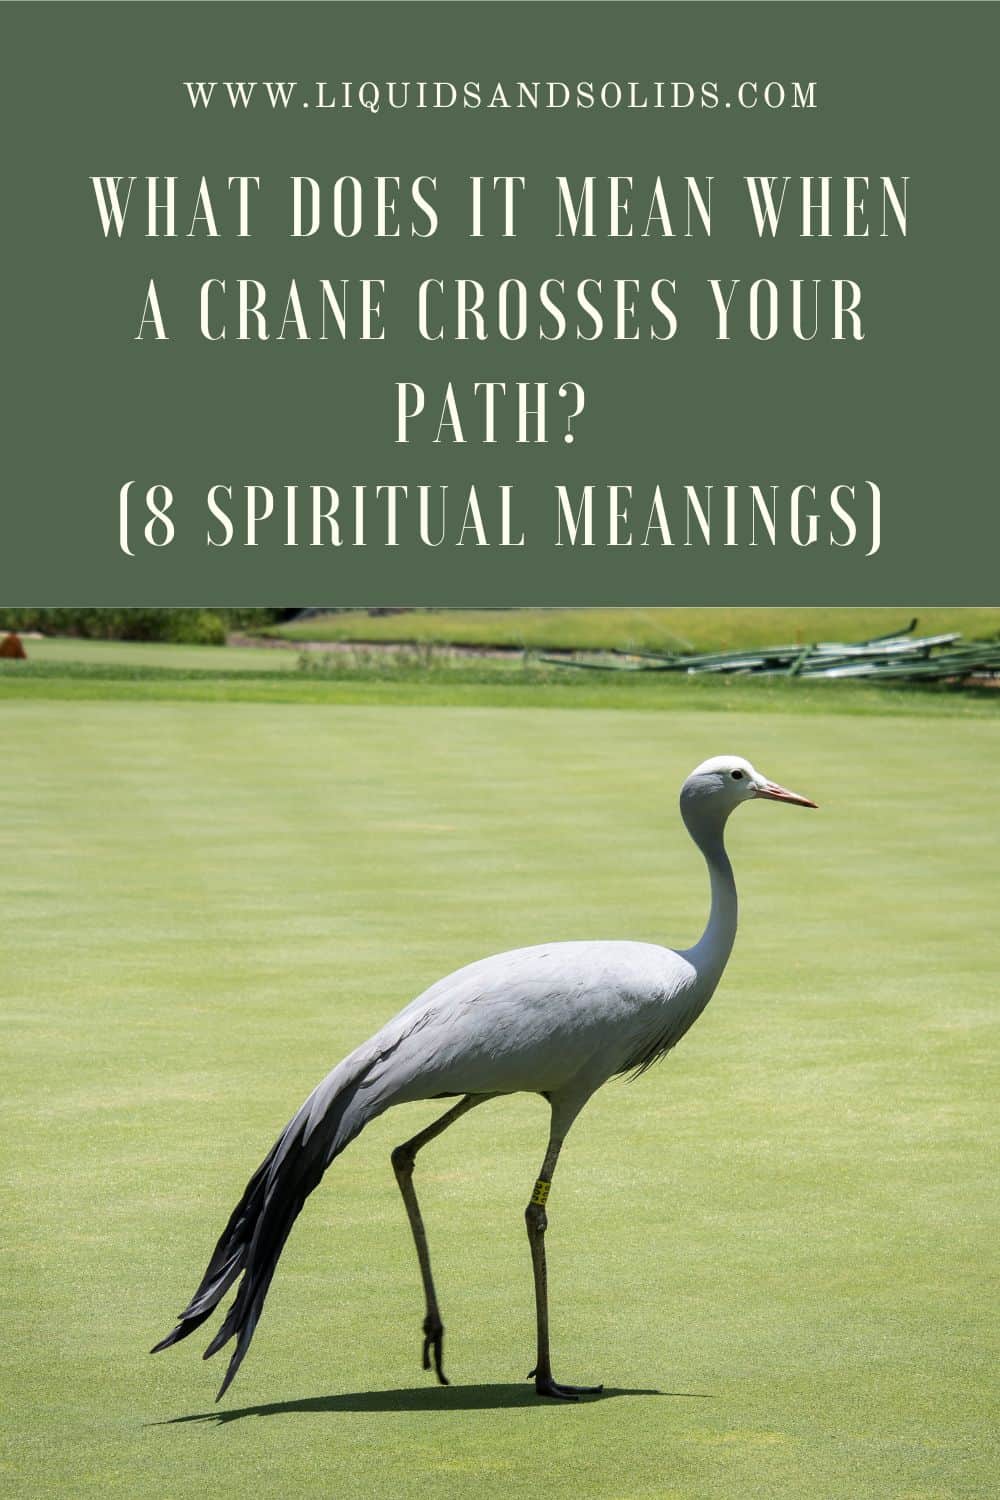 8 Meanings of a Crane Crossing your Path